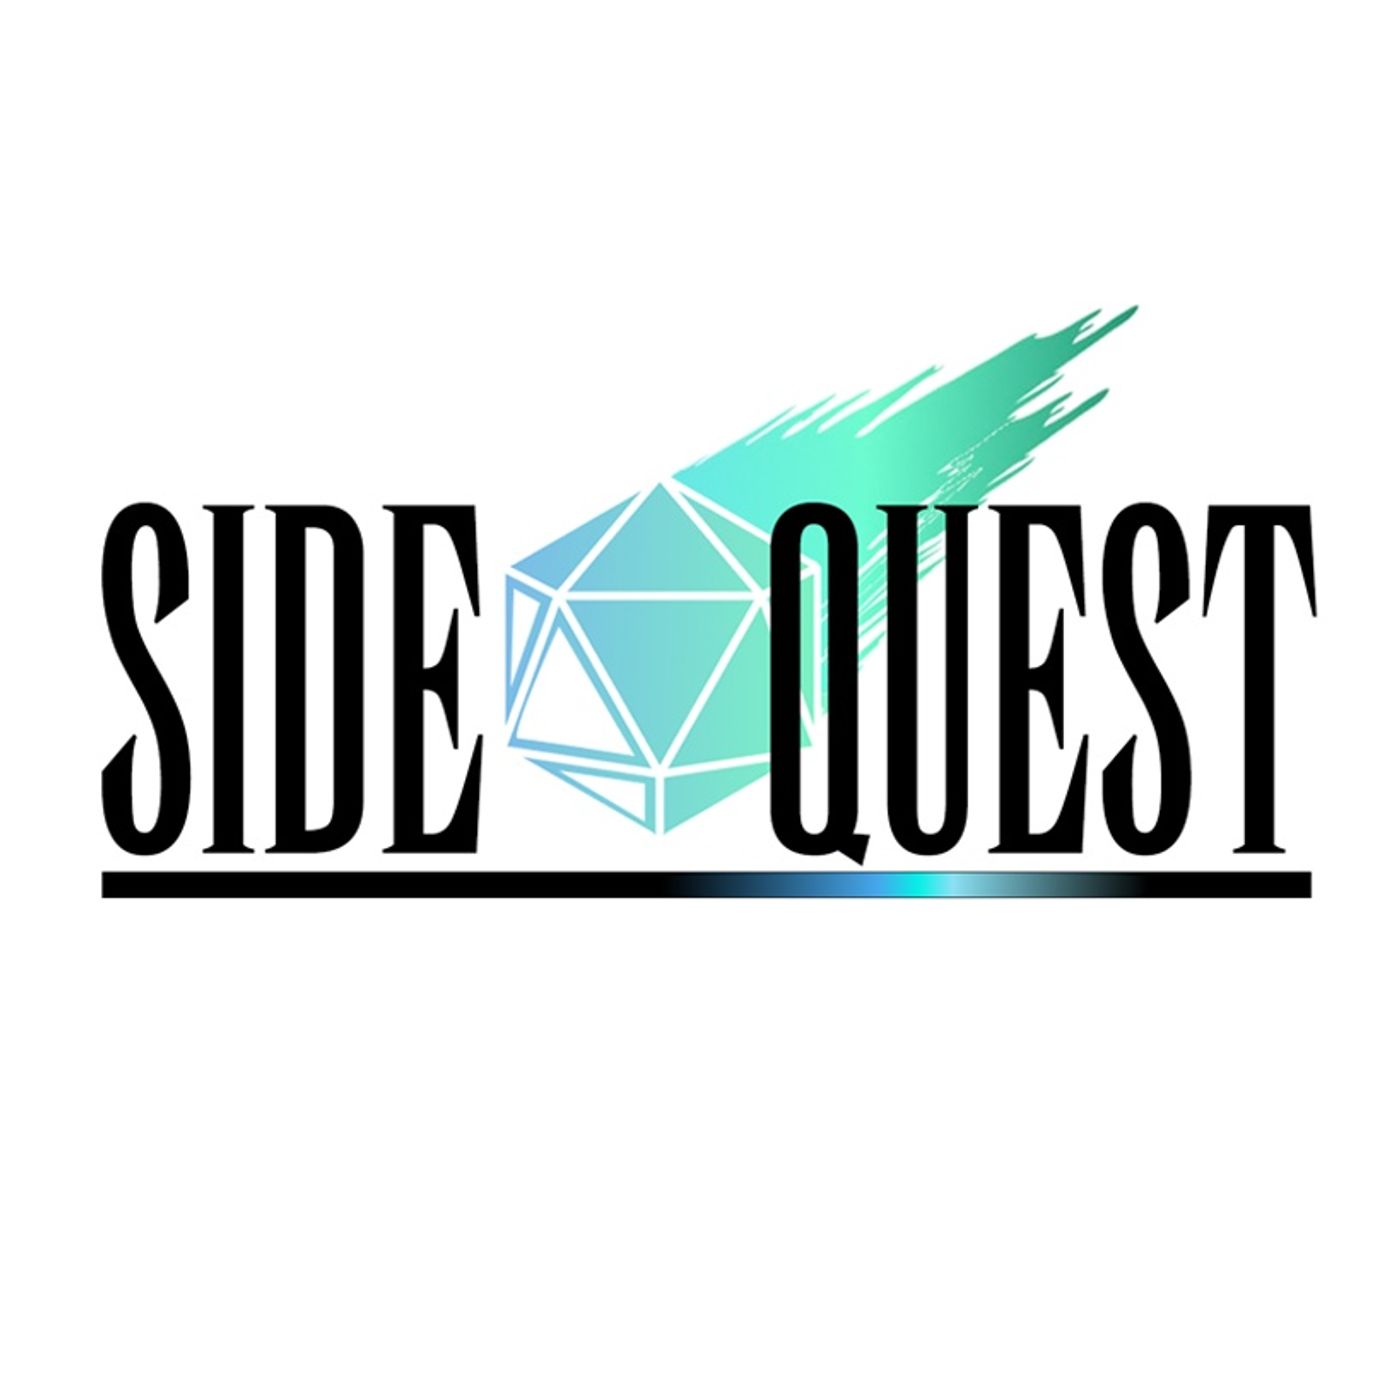 Side Quest 122: New Year with Sandy Butchers!